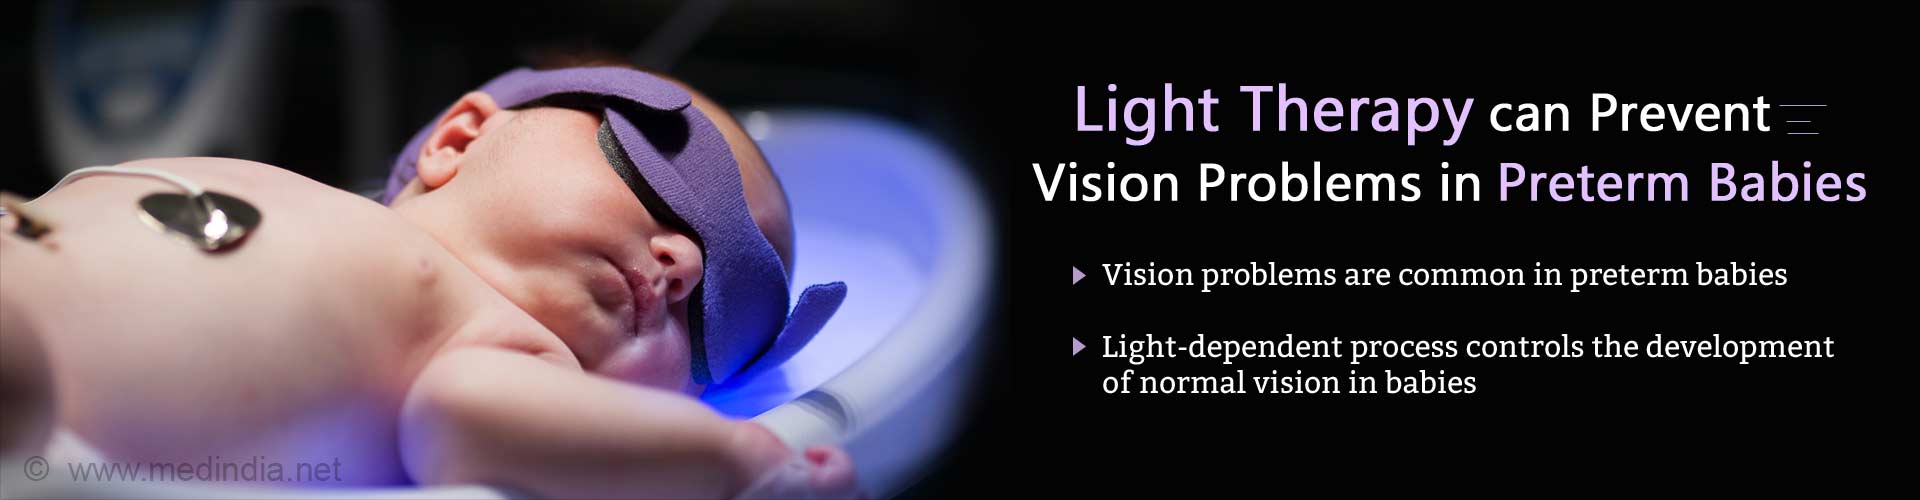 Light therapy can prevent vision problems in preterm babies. Vision problems are common in preterm babies. Light-dependent process controls the development of normal vision in babies.